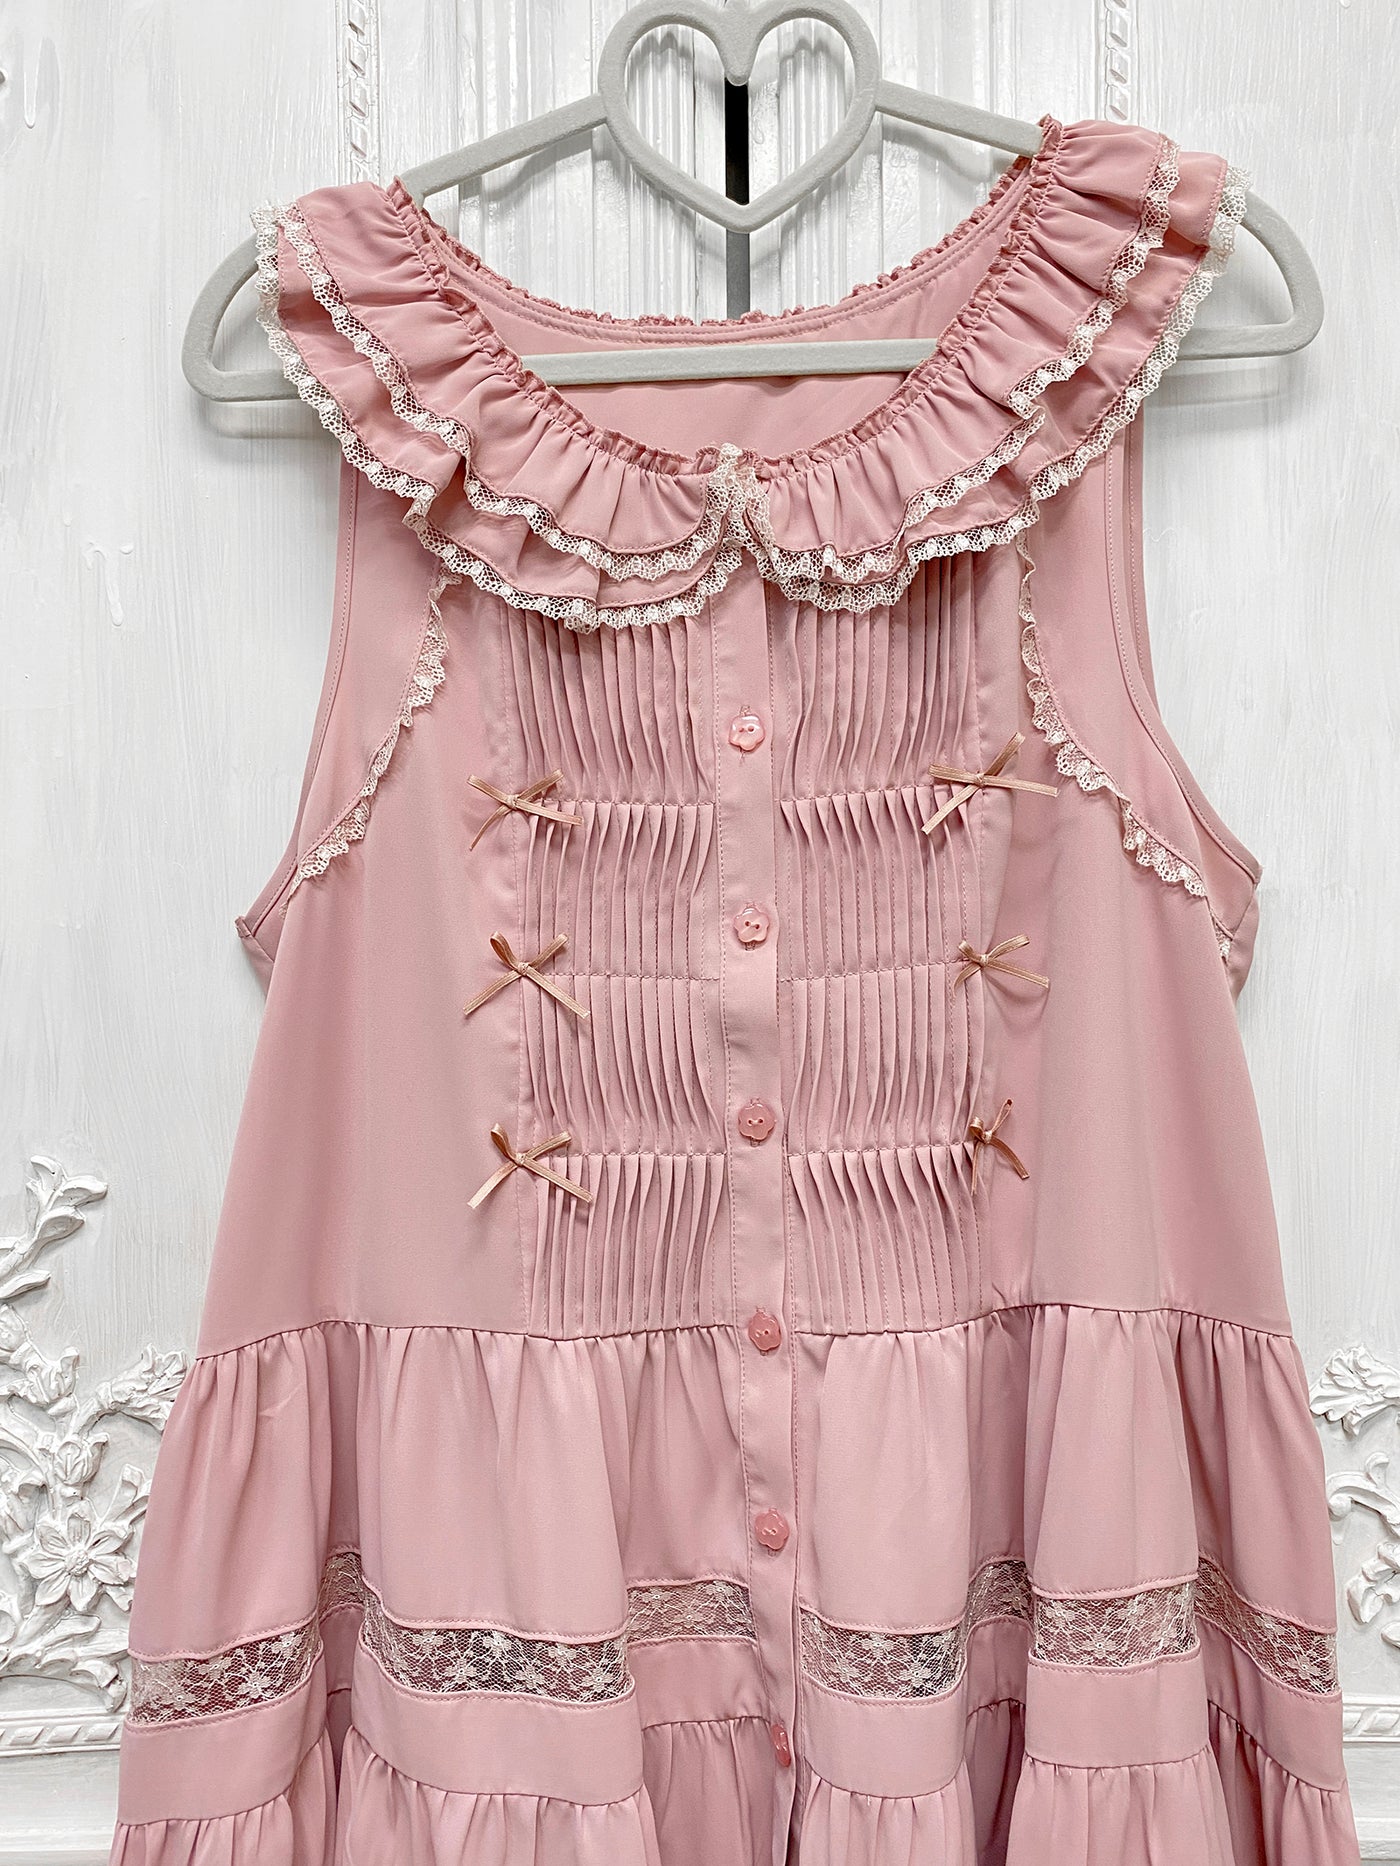 Little Dipper~Daily Lolita Hollowed-out Apron Dress Multicolors S gray-pink ( sleeveless) 